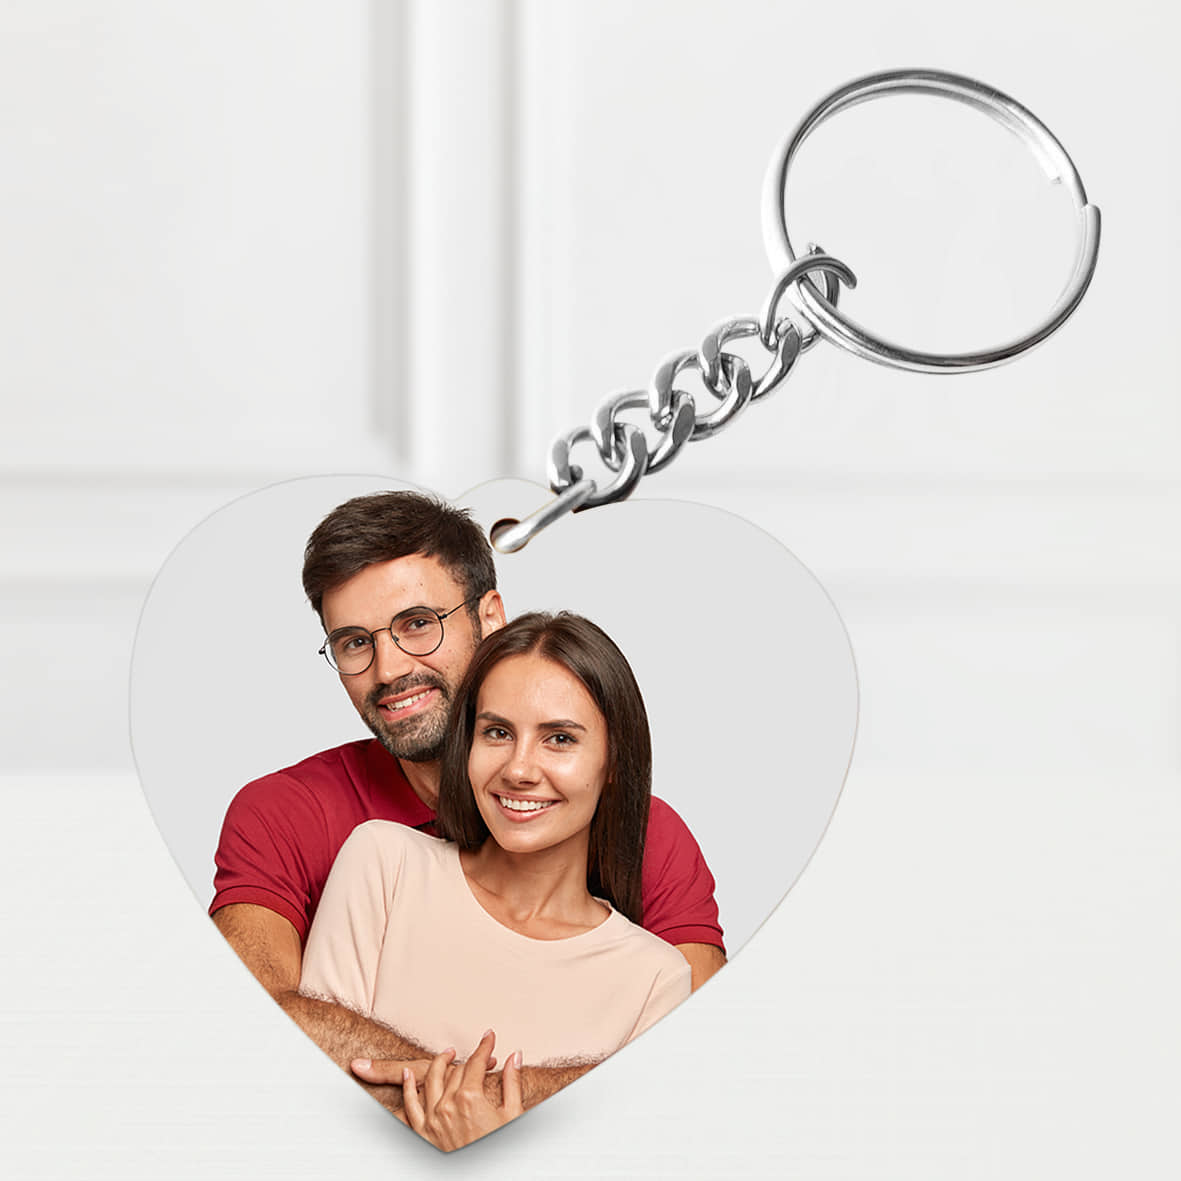 Magical Gifts Metal Personalized Keychain with Your Photos | Key ring with  Picture For Bike, Car, Home, Office | Customized Keychains Gifts for Men  and Women : Amazon.in: Car & Motorbike